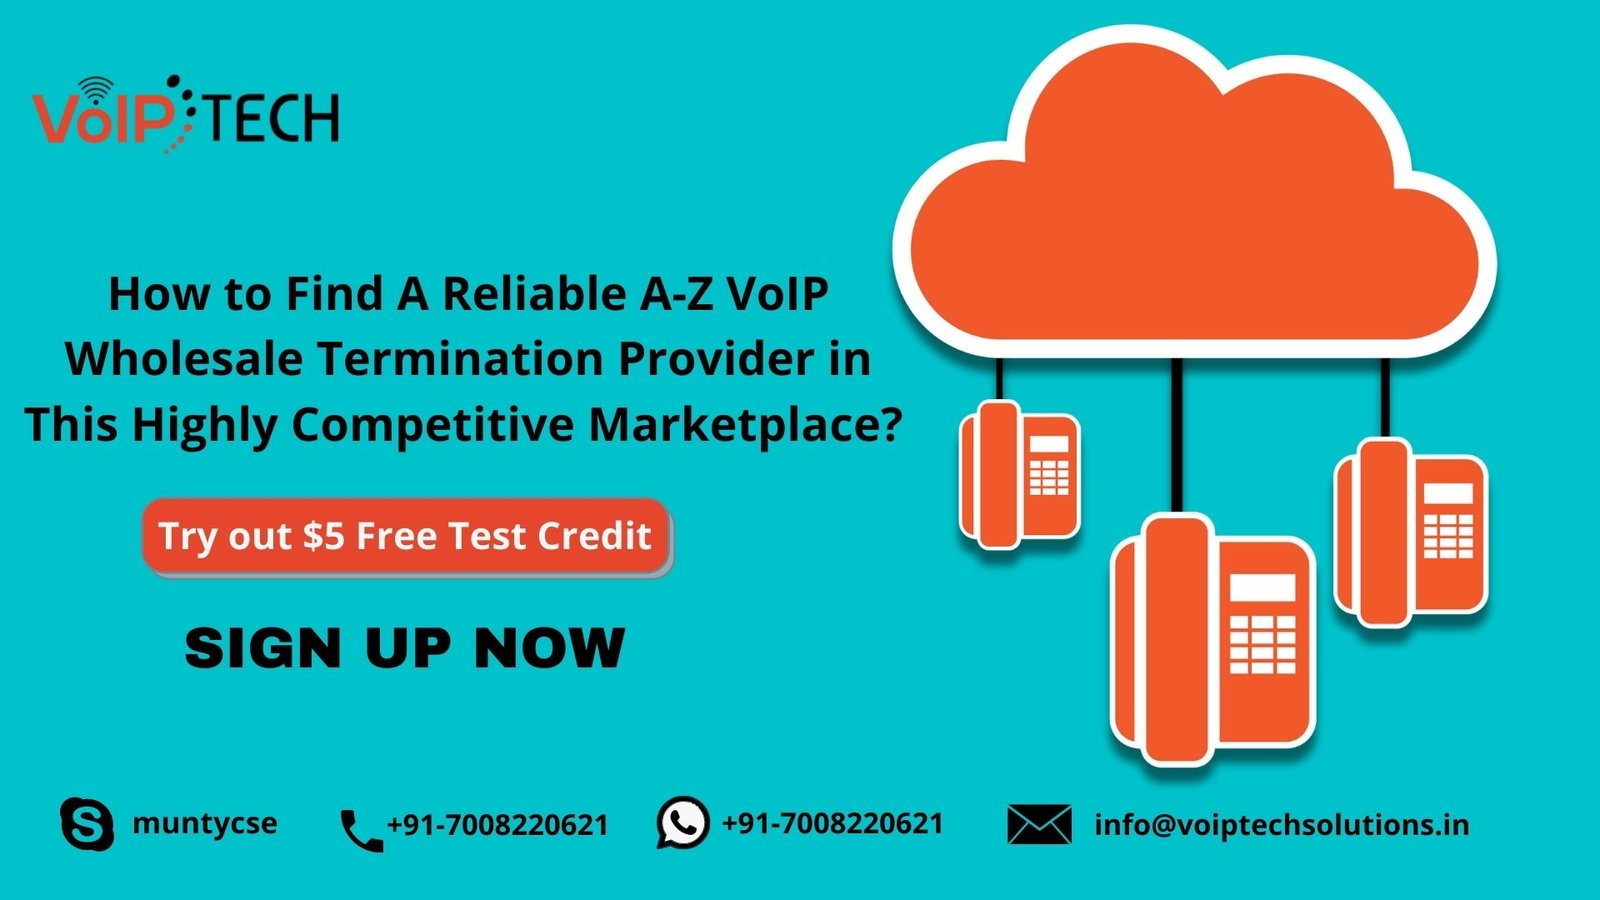 VoIP tech solutions, vici dialer, virtual number, Voip Providers, voip services in india, best sip provider, business voip providers, VoIP Phone Numbers, voip minutes provider, top voip providers, voip minutes, How to Find A Reliable A-Z VoIP Wholesale Termination Provider in This Highly Competitive Marketplace? , A-Z VoIP Termination Provider, International VoIP Provider